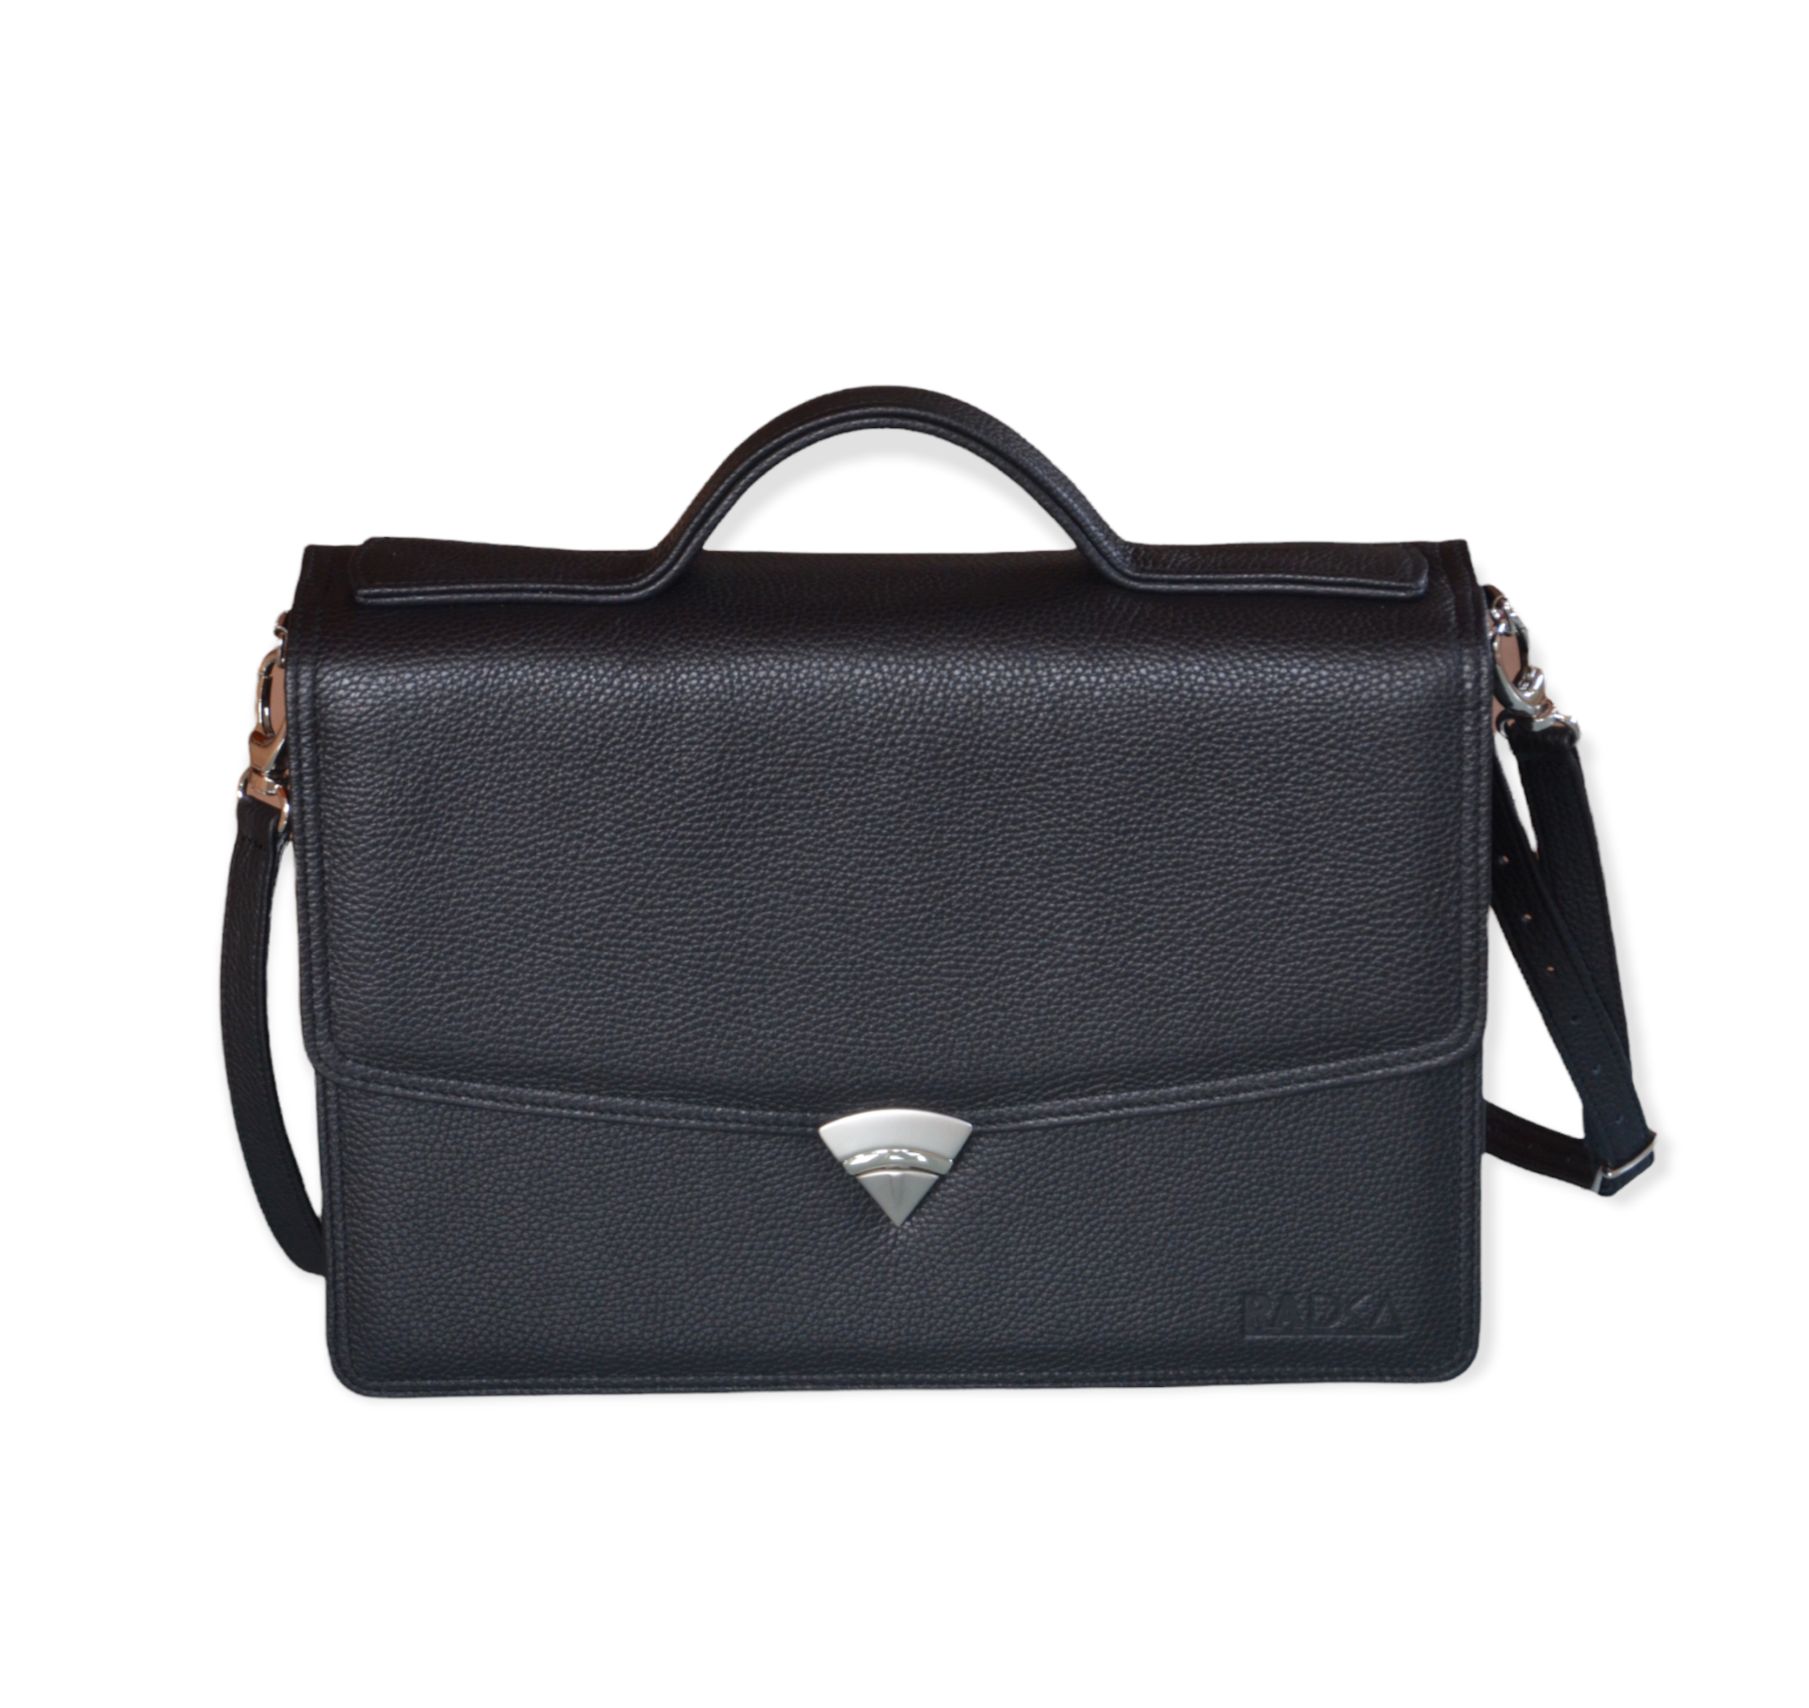 Leather Briefcase for Women